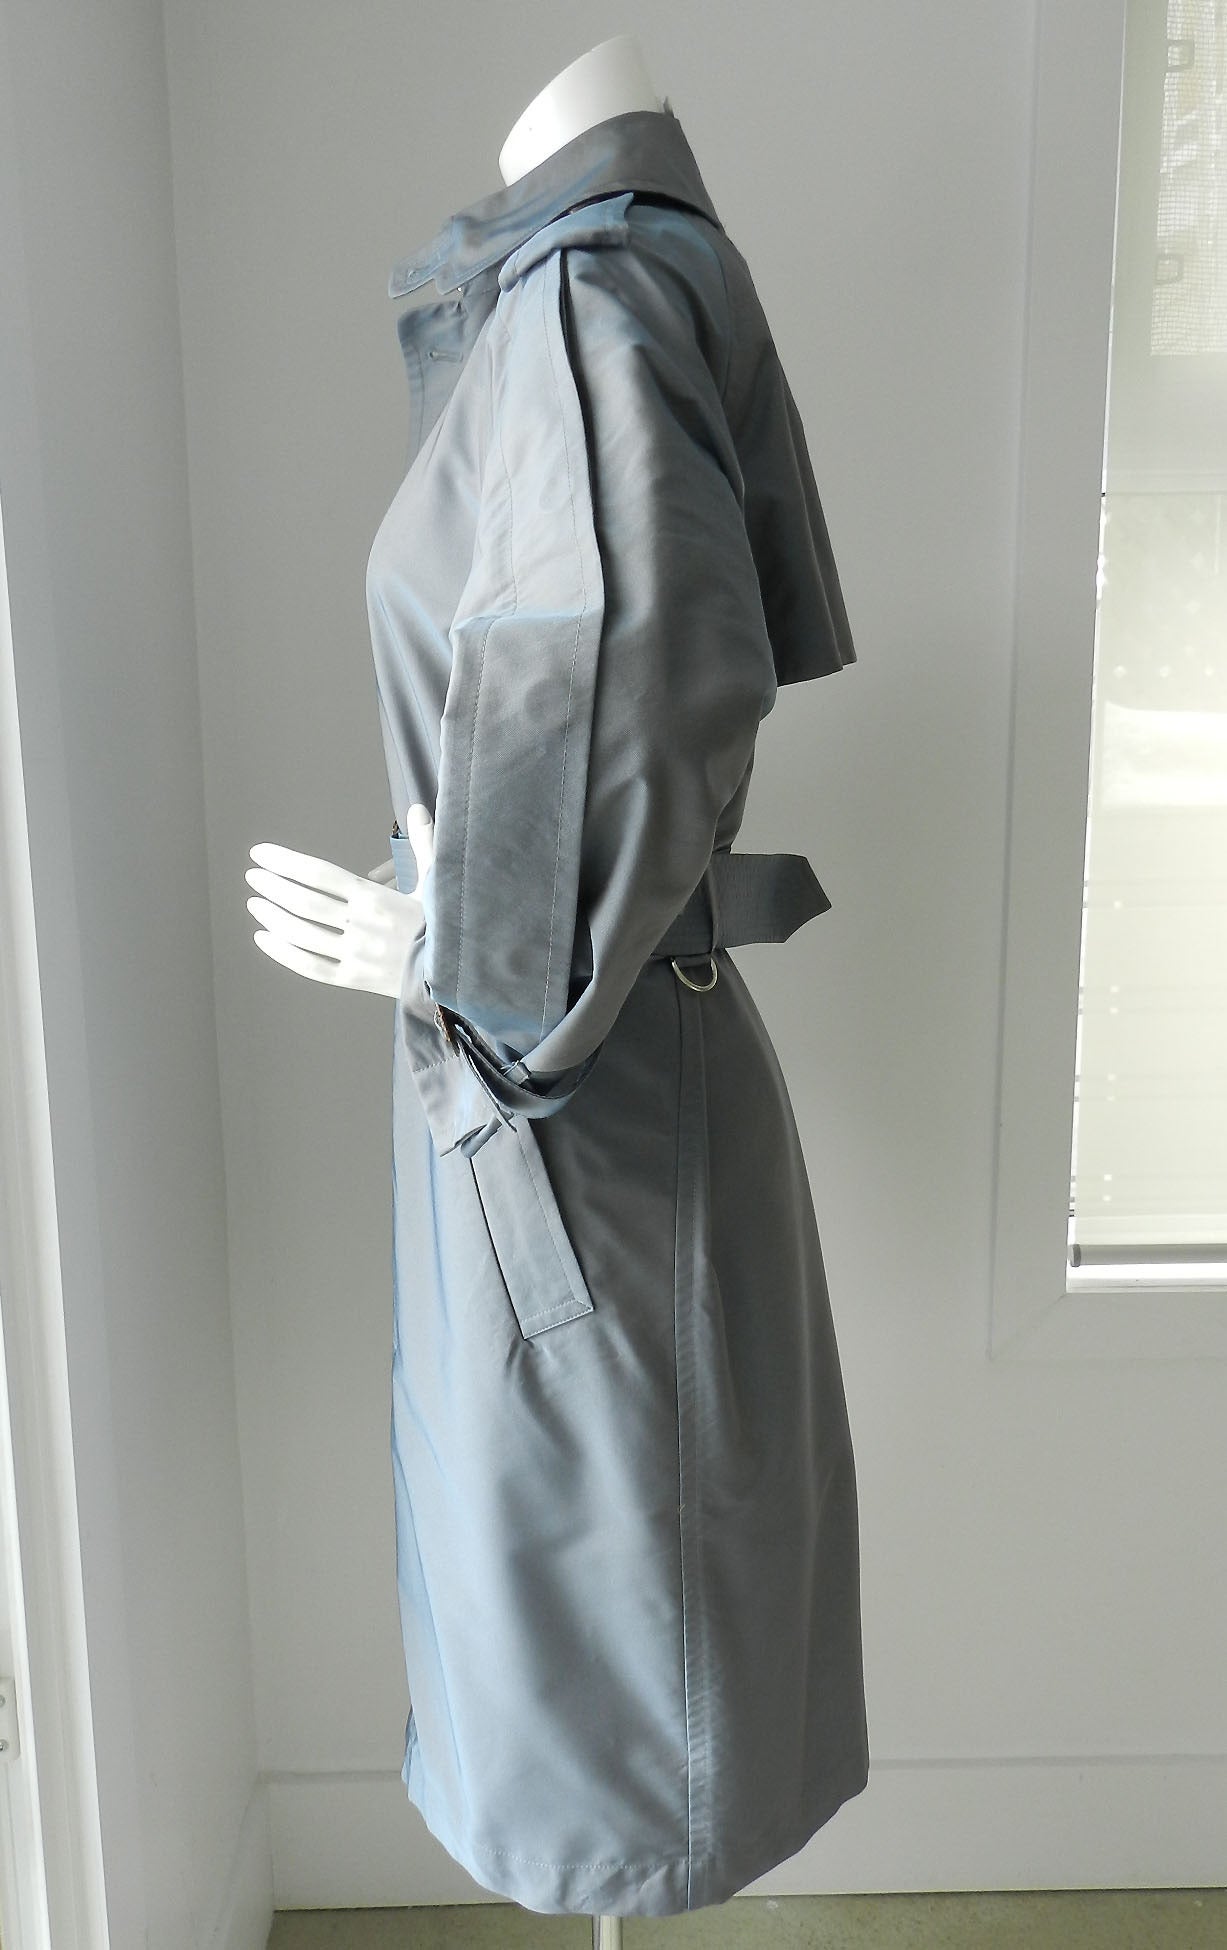 Jean Paul Gaultier pale greyish blue trench coat. Excellent previously owned condition. Fabric is 100% poly and has a slight iridescent sheen to it like sharkskin. Tagged size USA 4 but this can be worn by larger as it is cut oversized. Can fit an 8